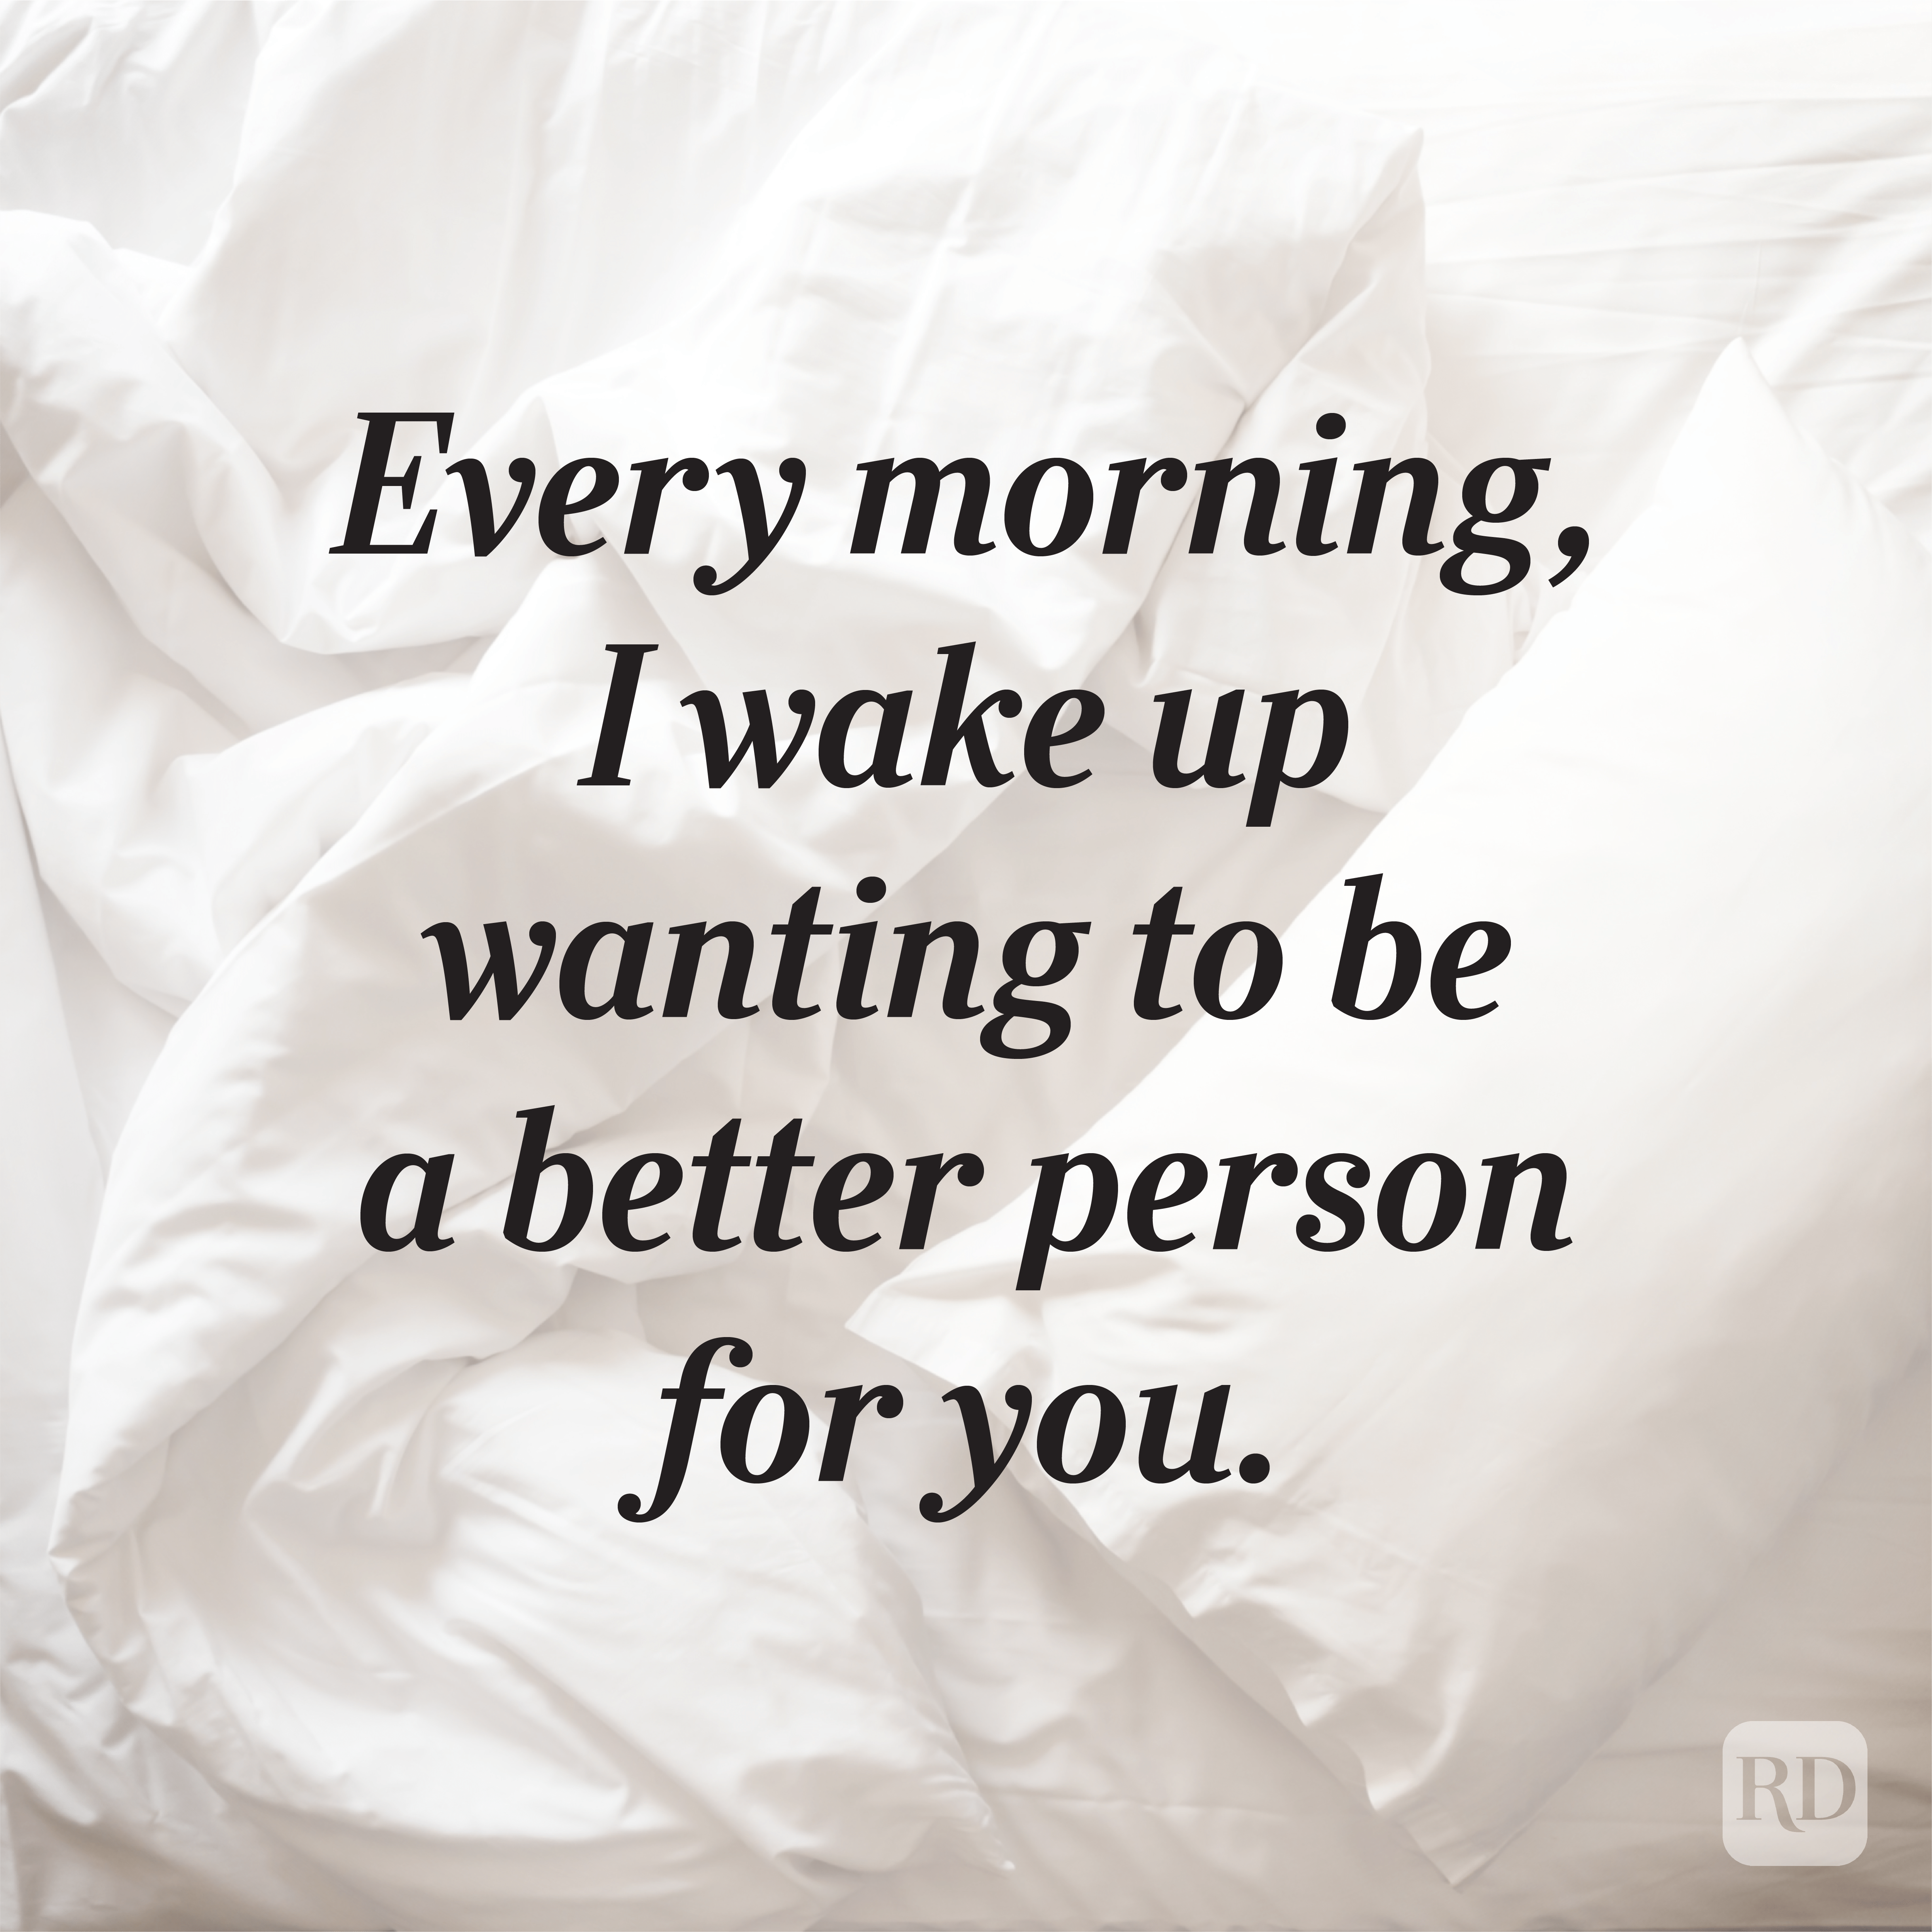 45 Good Morning Texts for Her - Parade